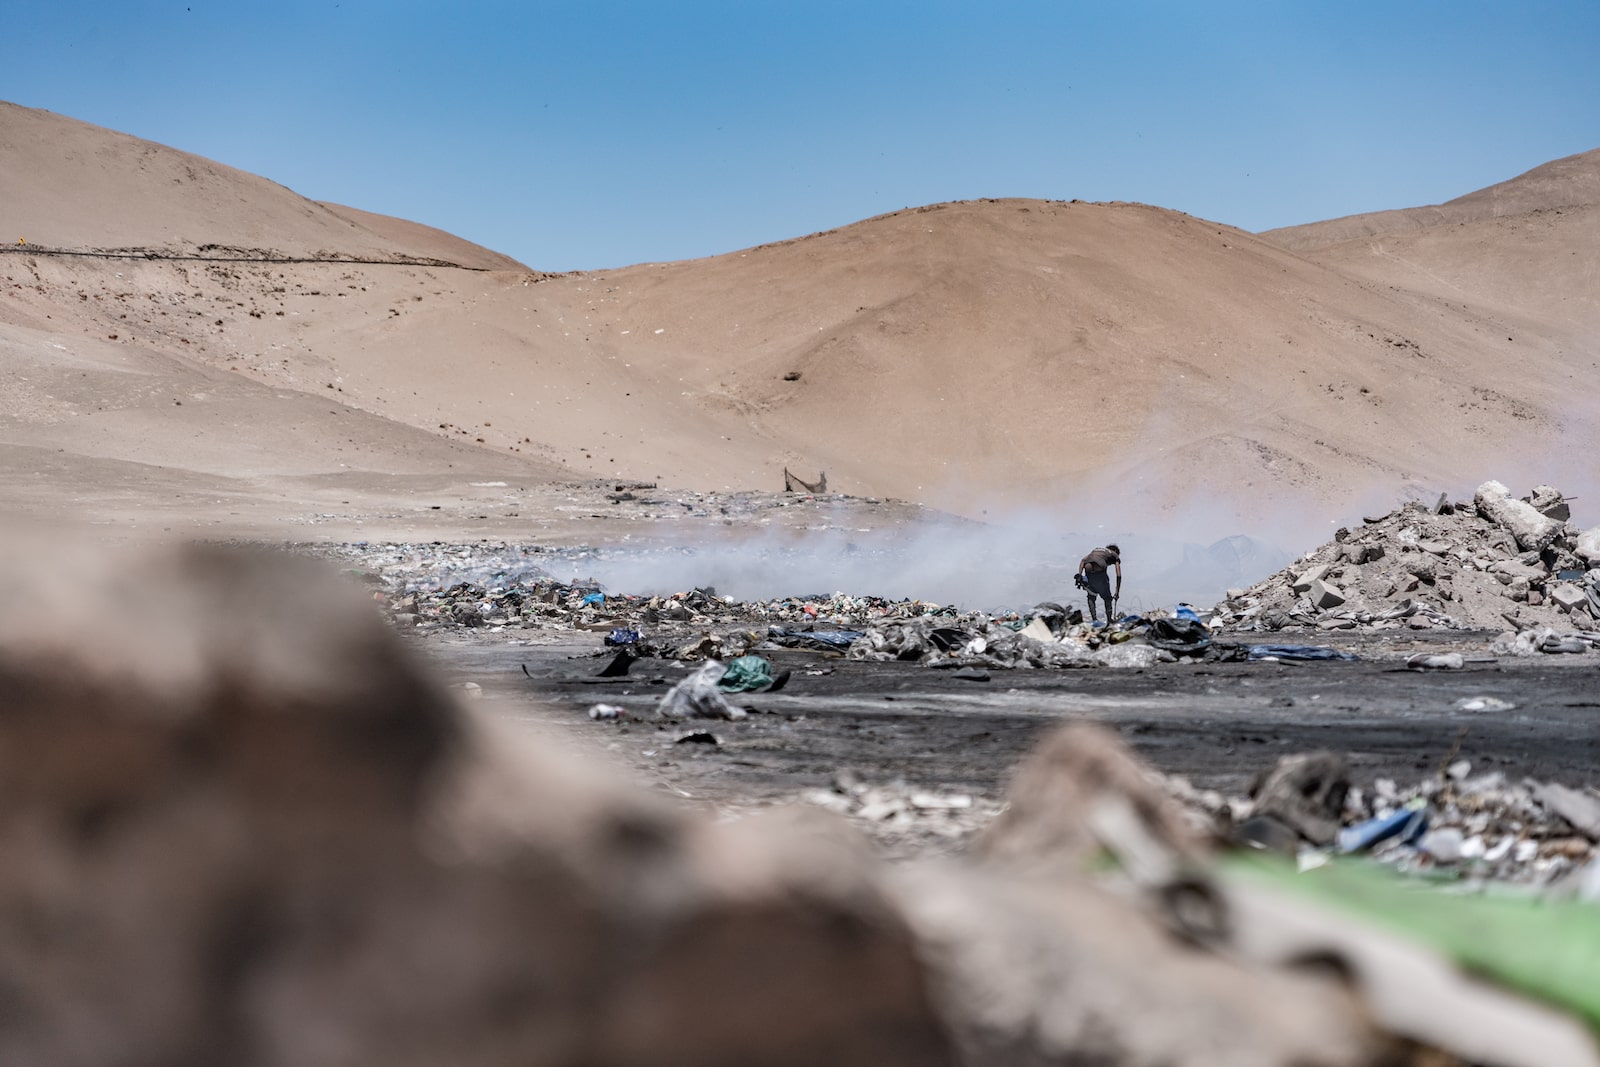 A man stands near large piles of burning clothing in the desert